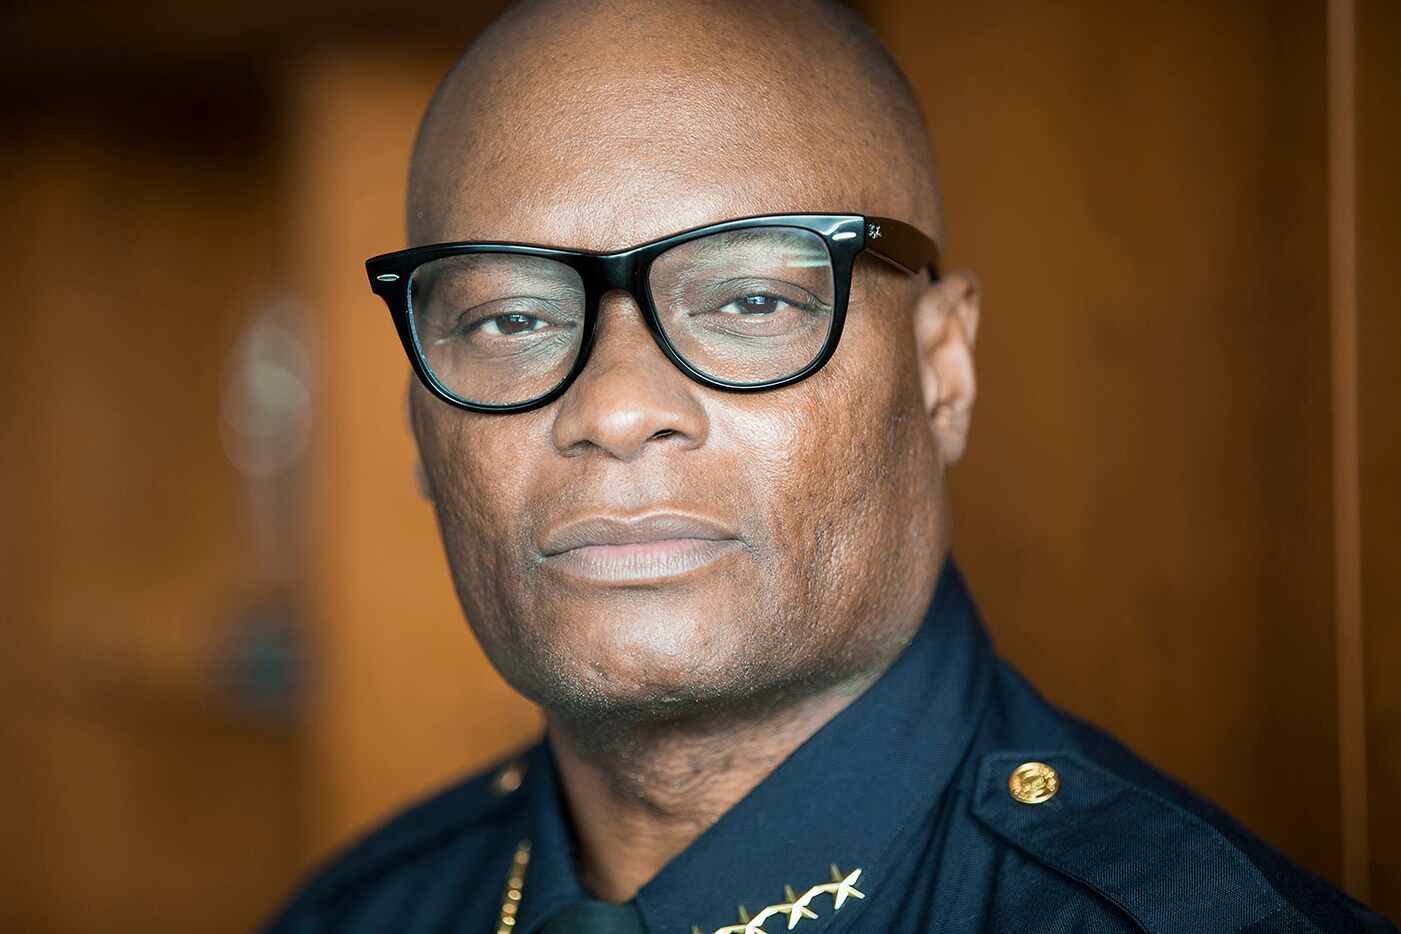 Dallas Police Chief David Brown's retirement announcement caught many by surprise.